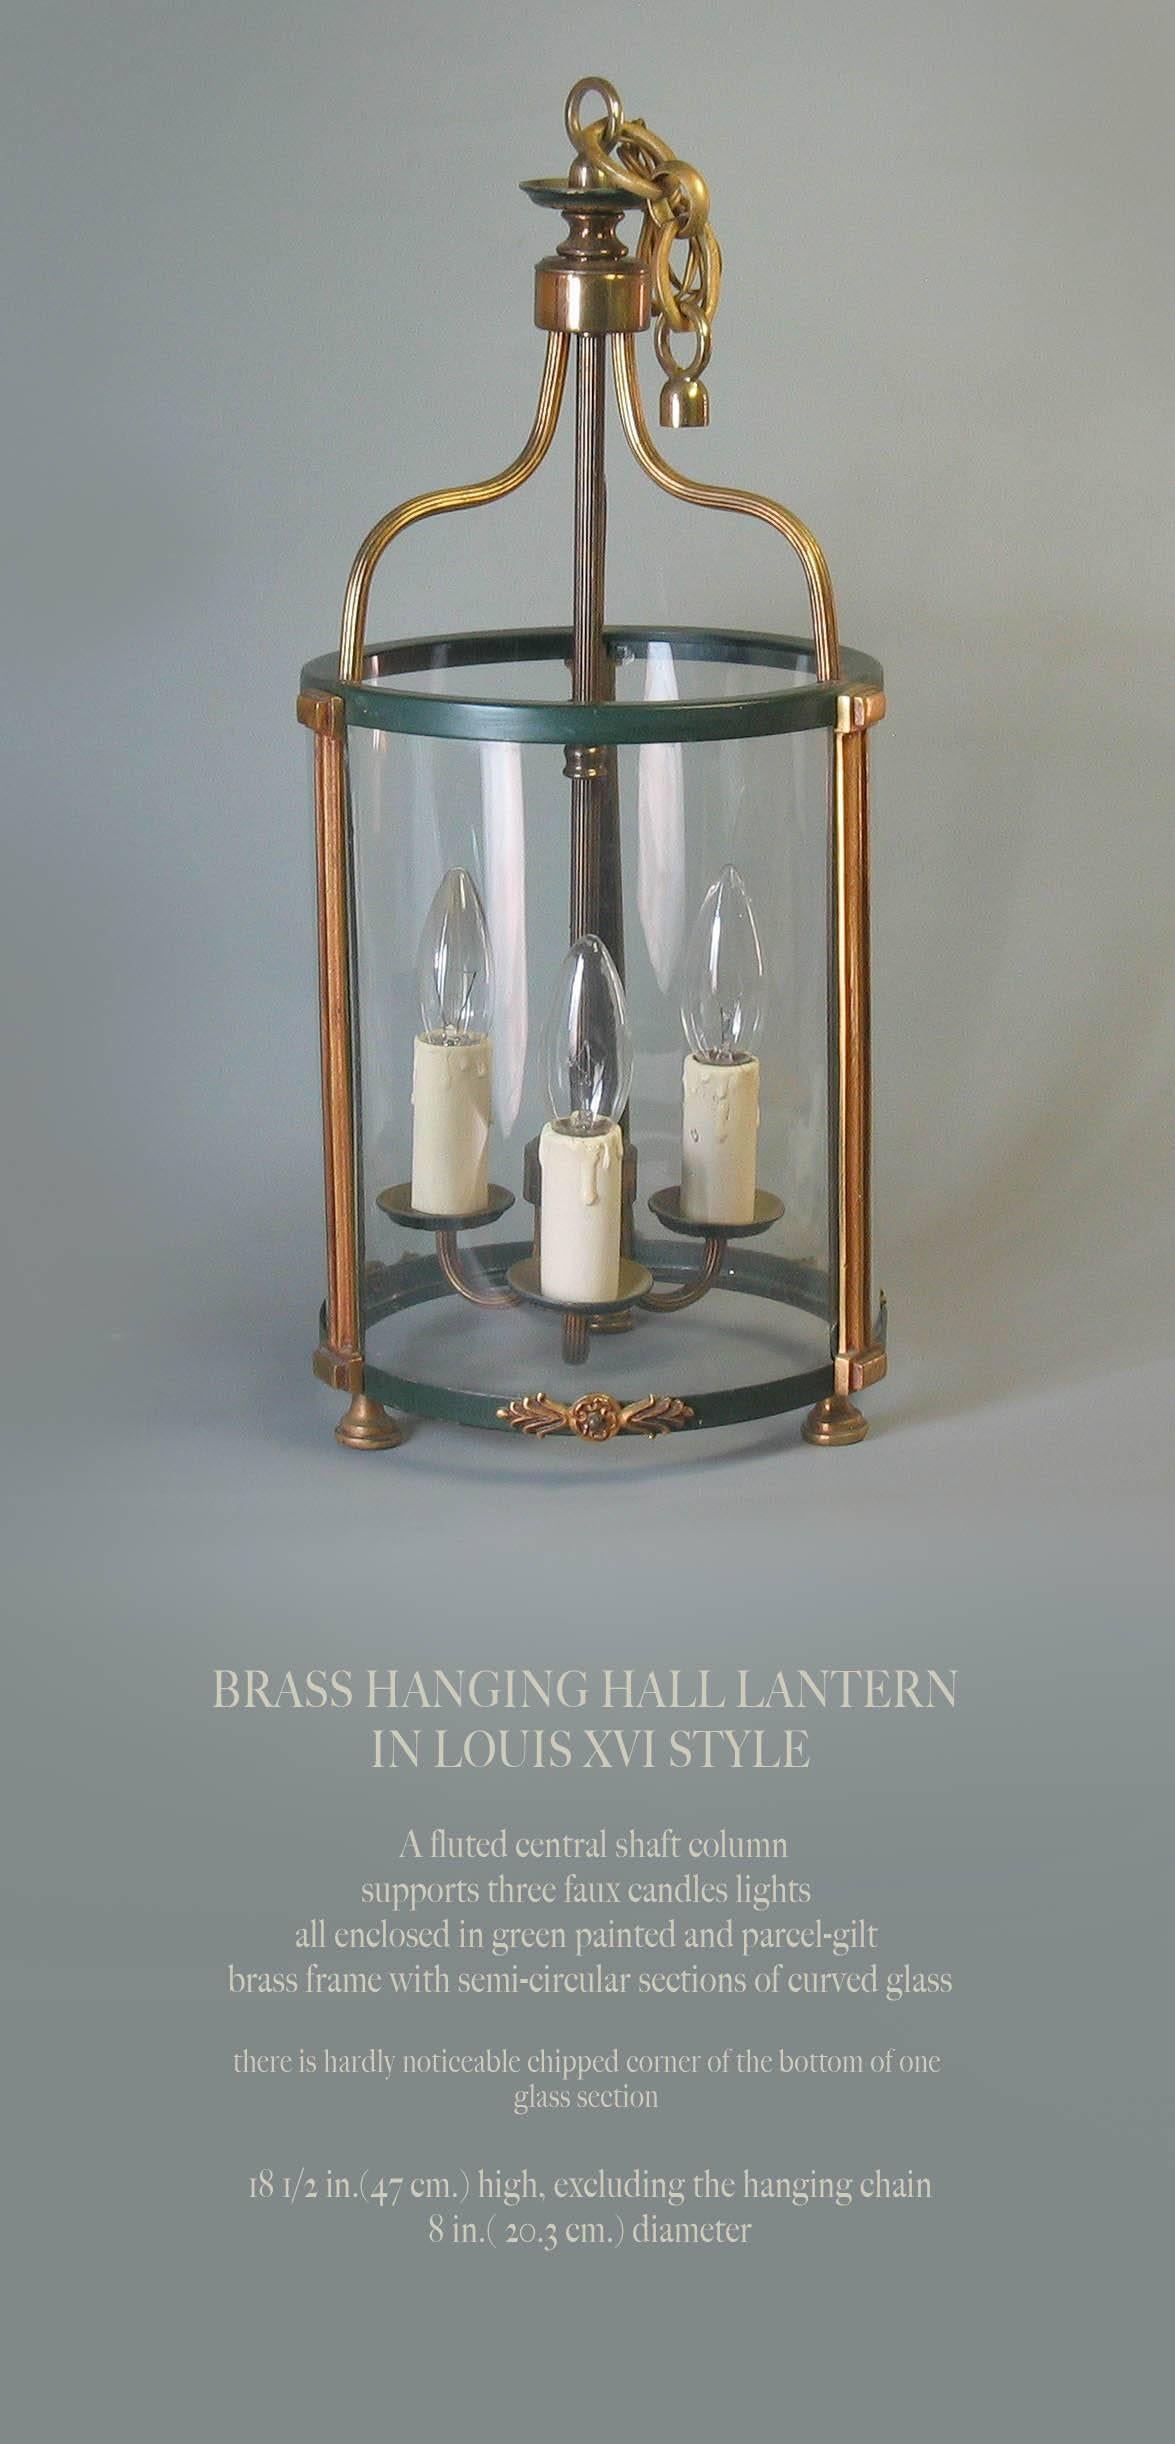 A brass hanging hall lantern in Louis XVI style, a fluted central shaft column supports three faux candle lights, all enclosed in green painted and parcel-gilt brass frame with semi-circular sections of curved glass. There is a hardly noticeable